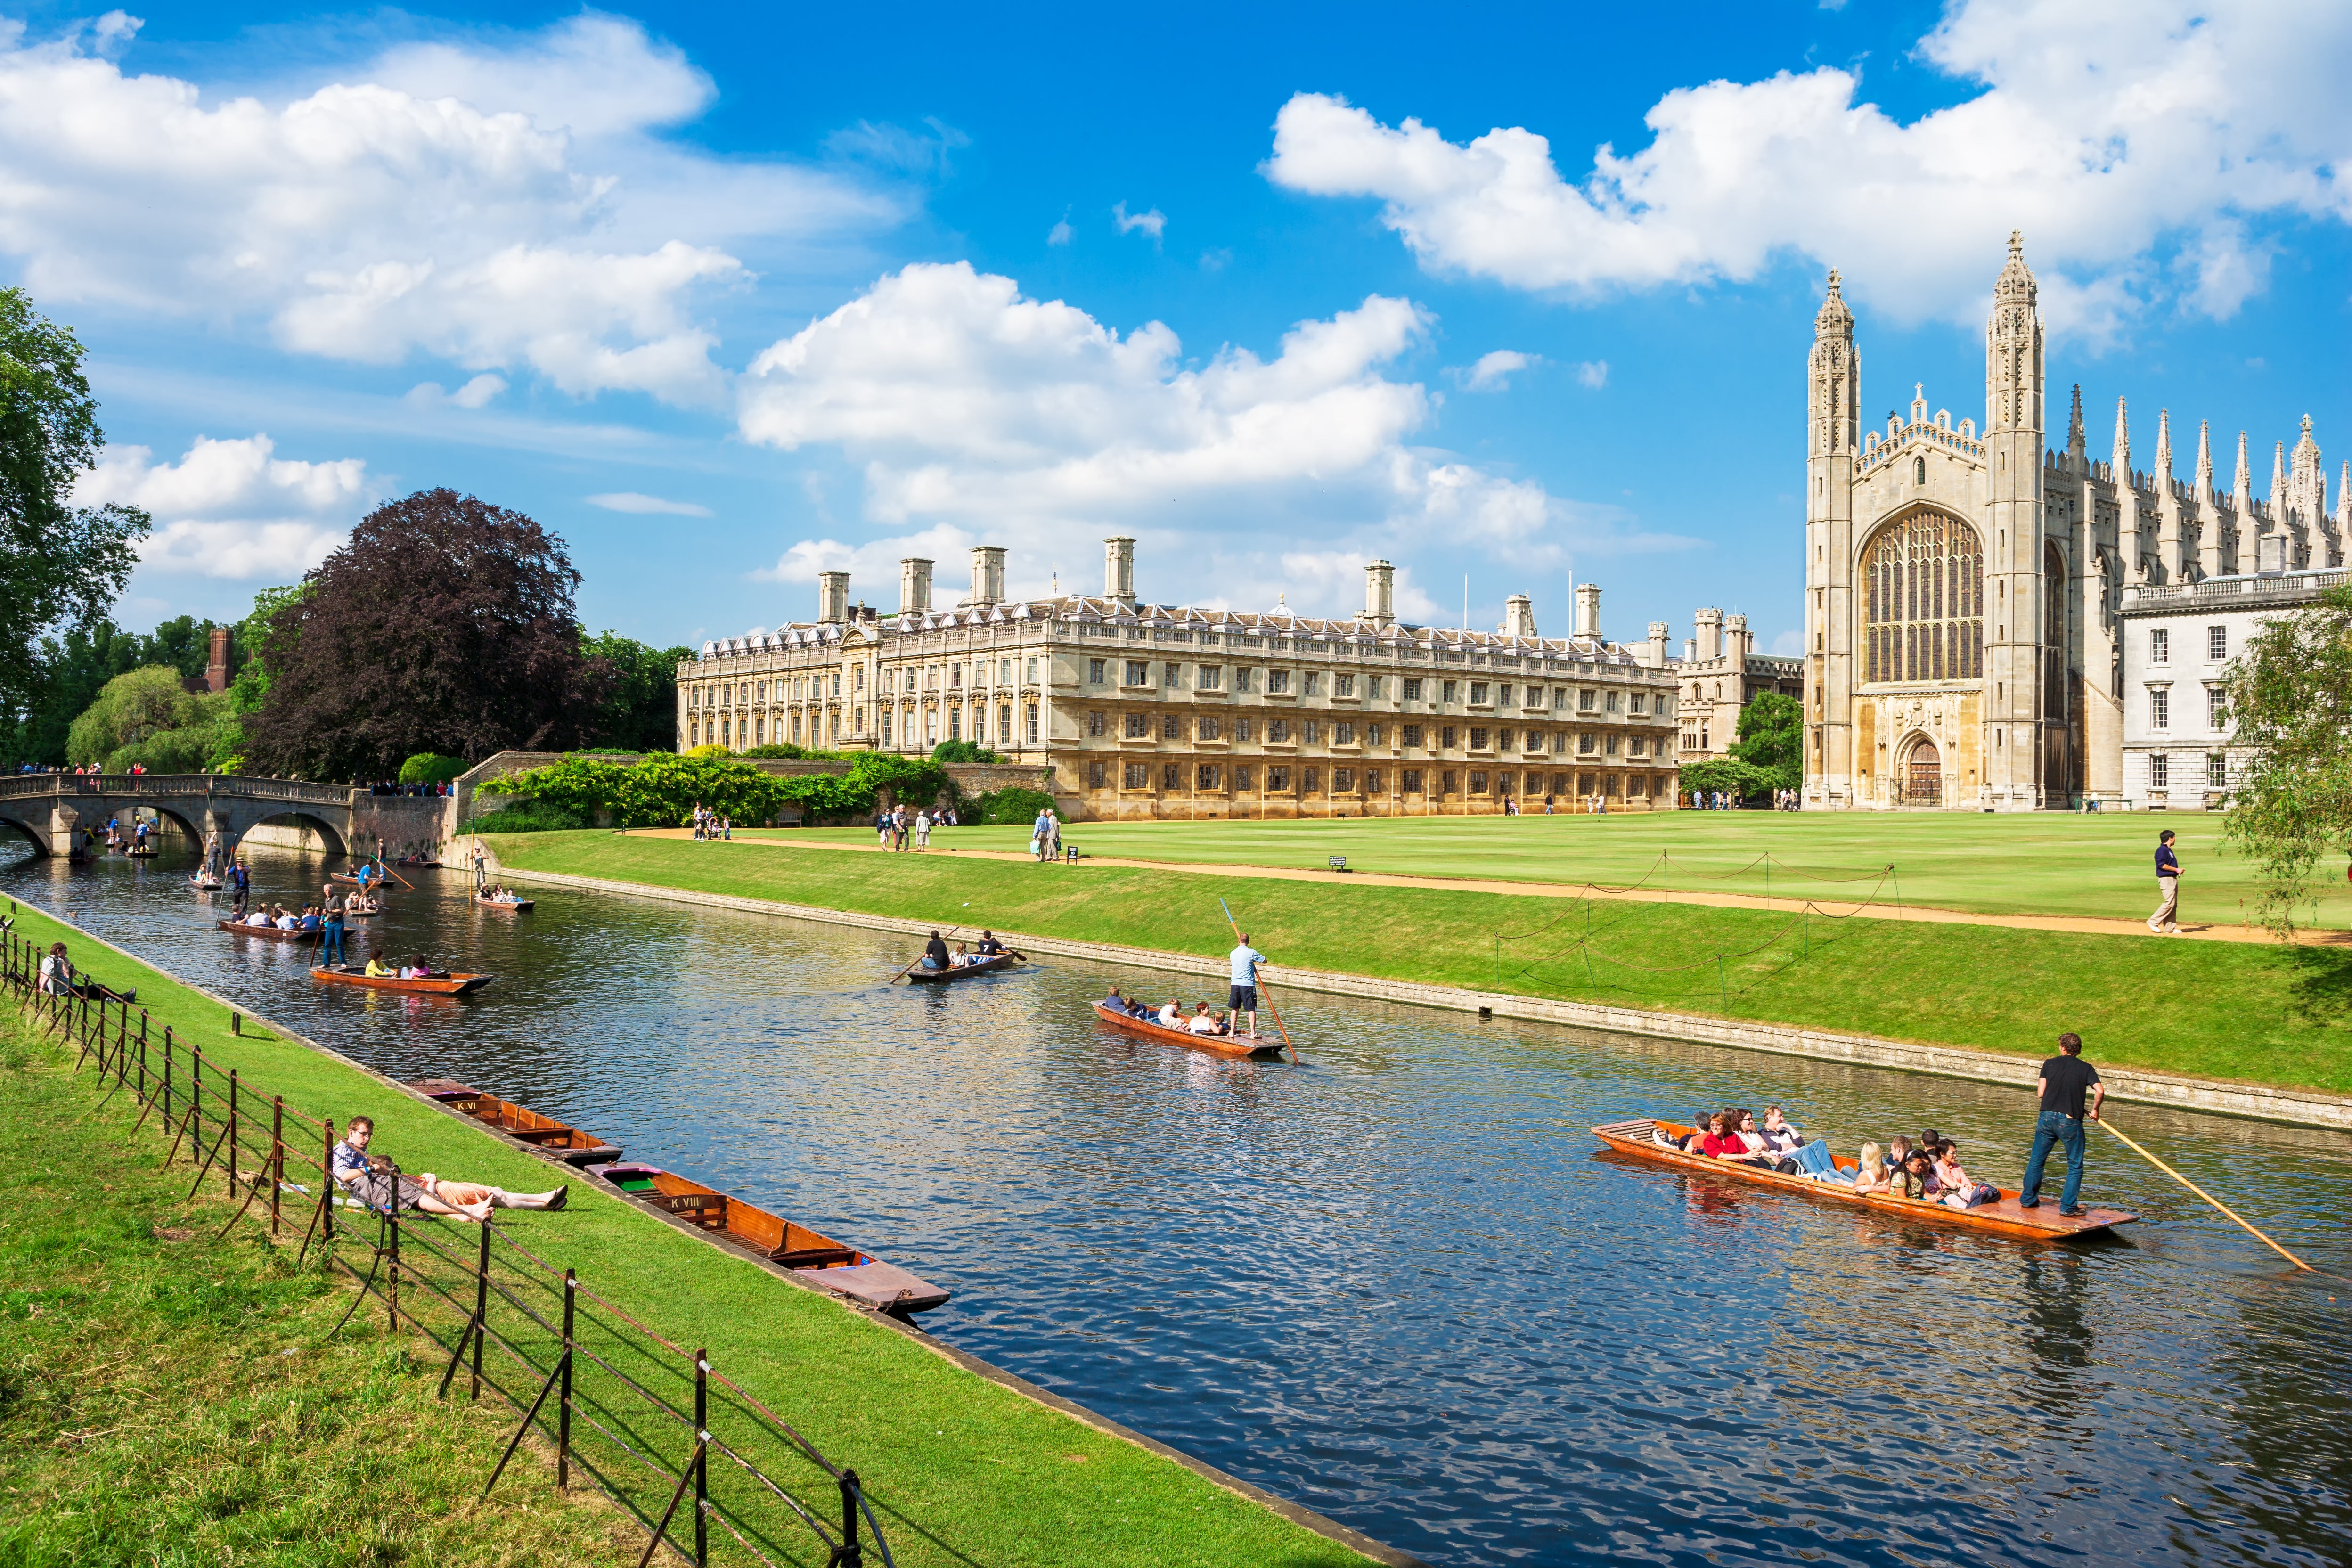 Tourists can enjoy punting along the River Cam